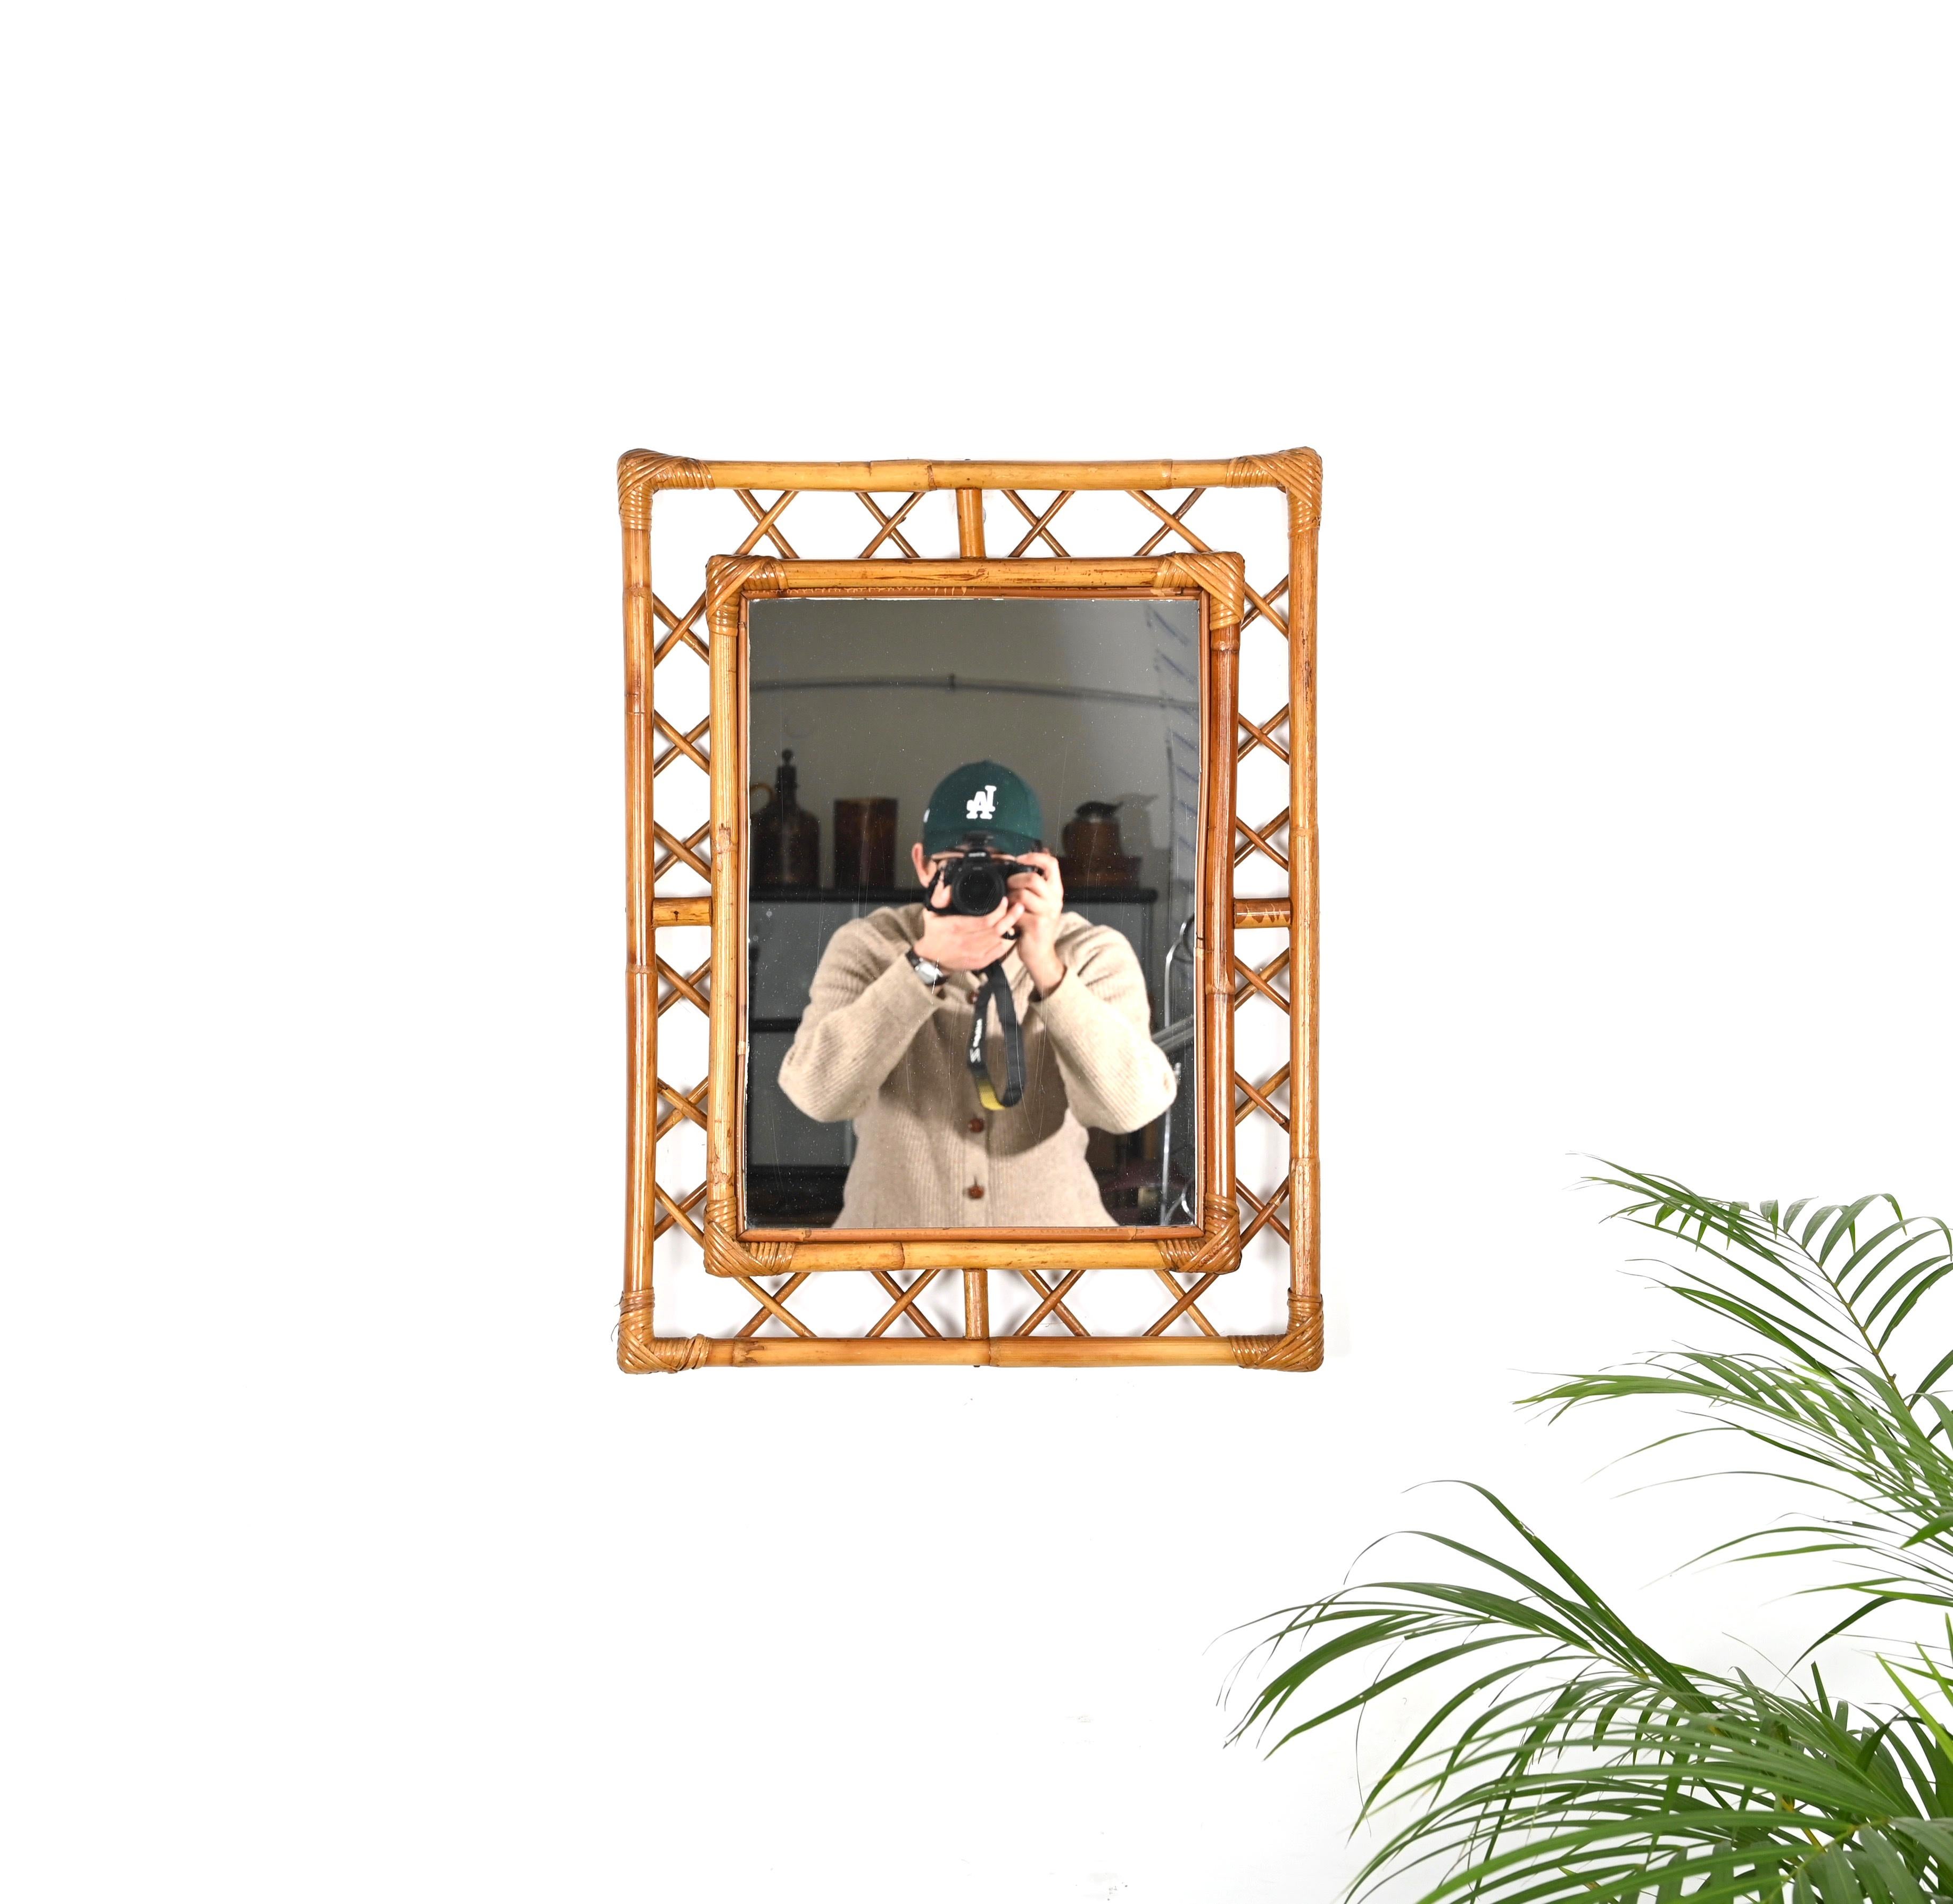 Beautiful Côte d'Azur style rectangular wall mirror in bamboo and hand-woven rattan wicker. This lovely mirror was produced in Italy during the 1960s.

This unique mirror features two rectangular bamboo frames with stunning decorations between them.